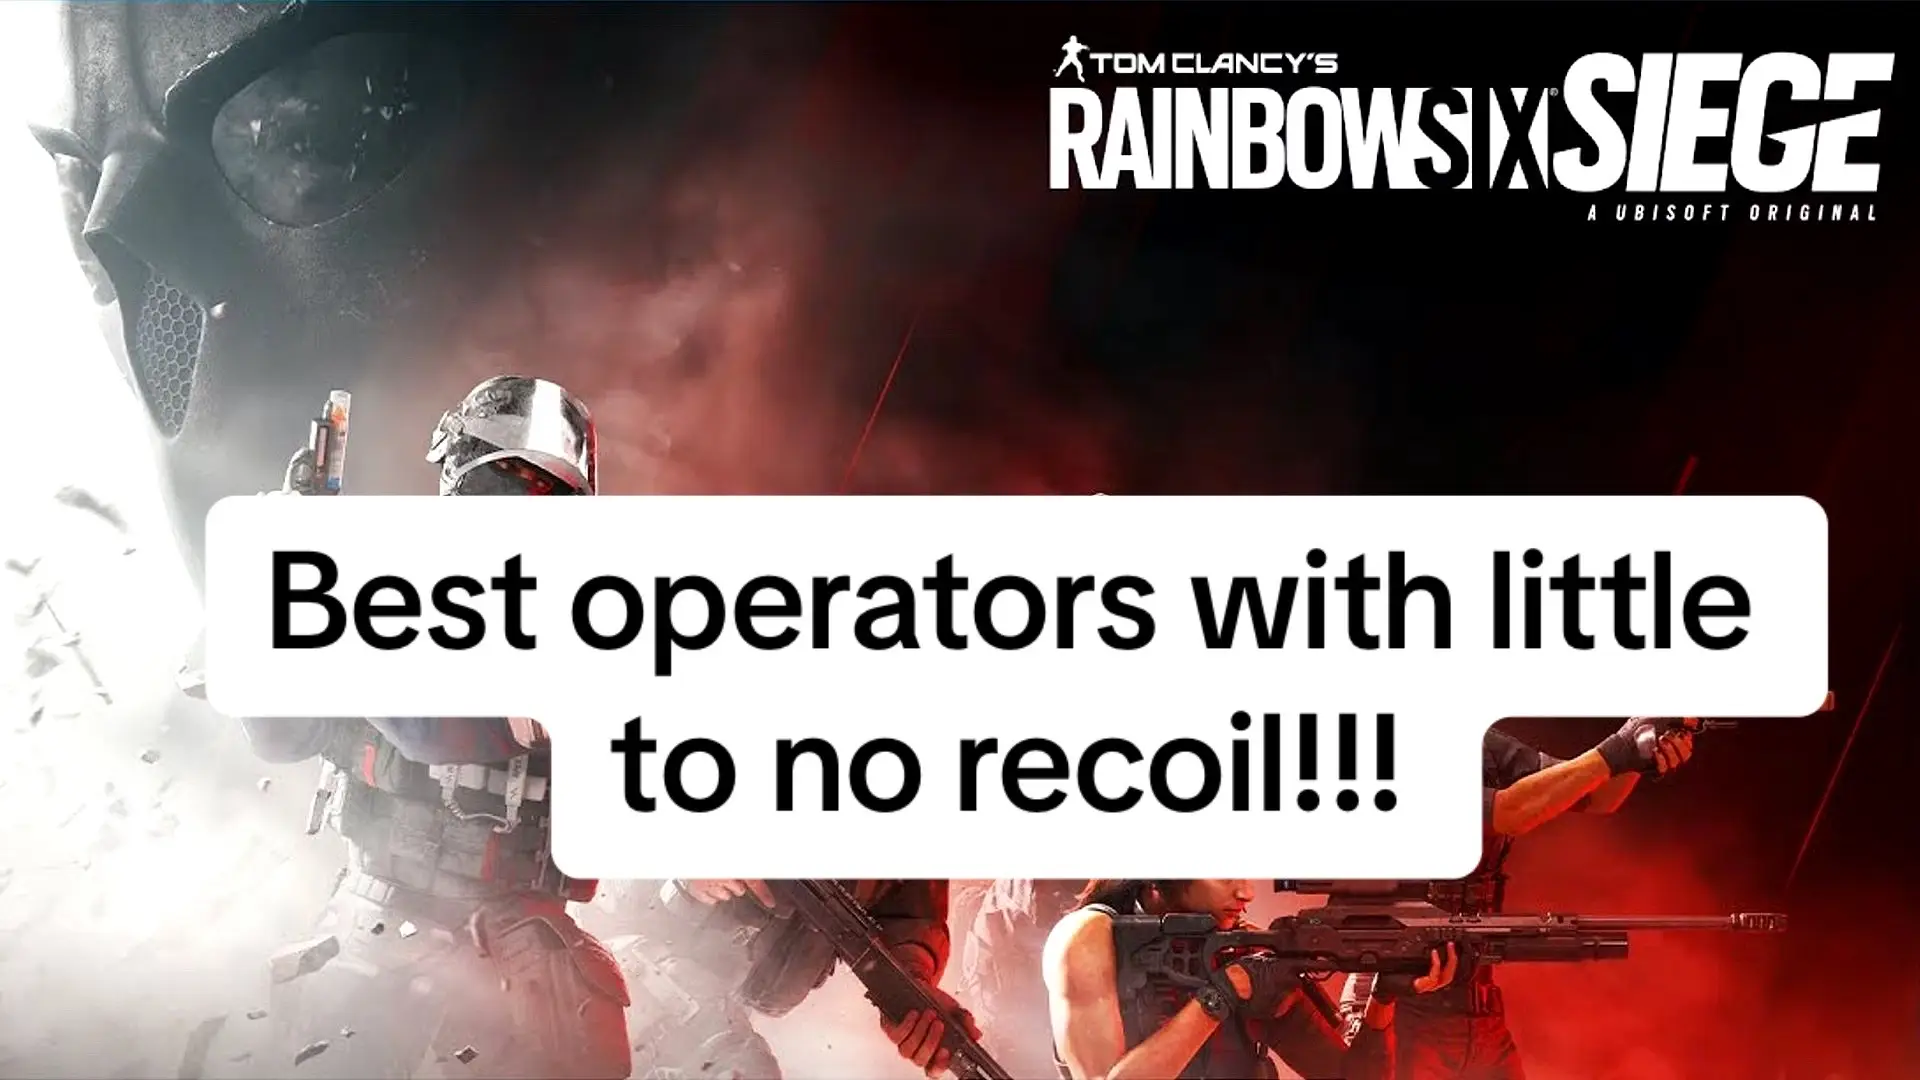 Operators with little to no recoil!!!#gamer #like #fyp #grindingforbetterdayz #follow #streamer #streaming #viral #rainbowsixsiegeclips #rainbowsix #rainbowsixsiege #gaming #R6 #deal #clothing #golf #clothes 